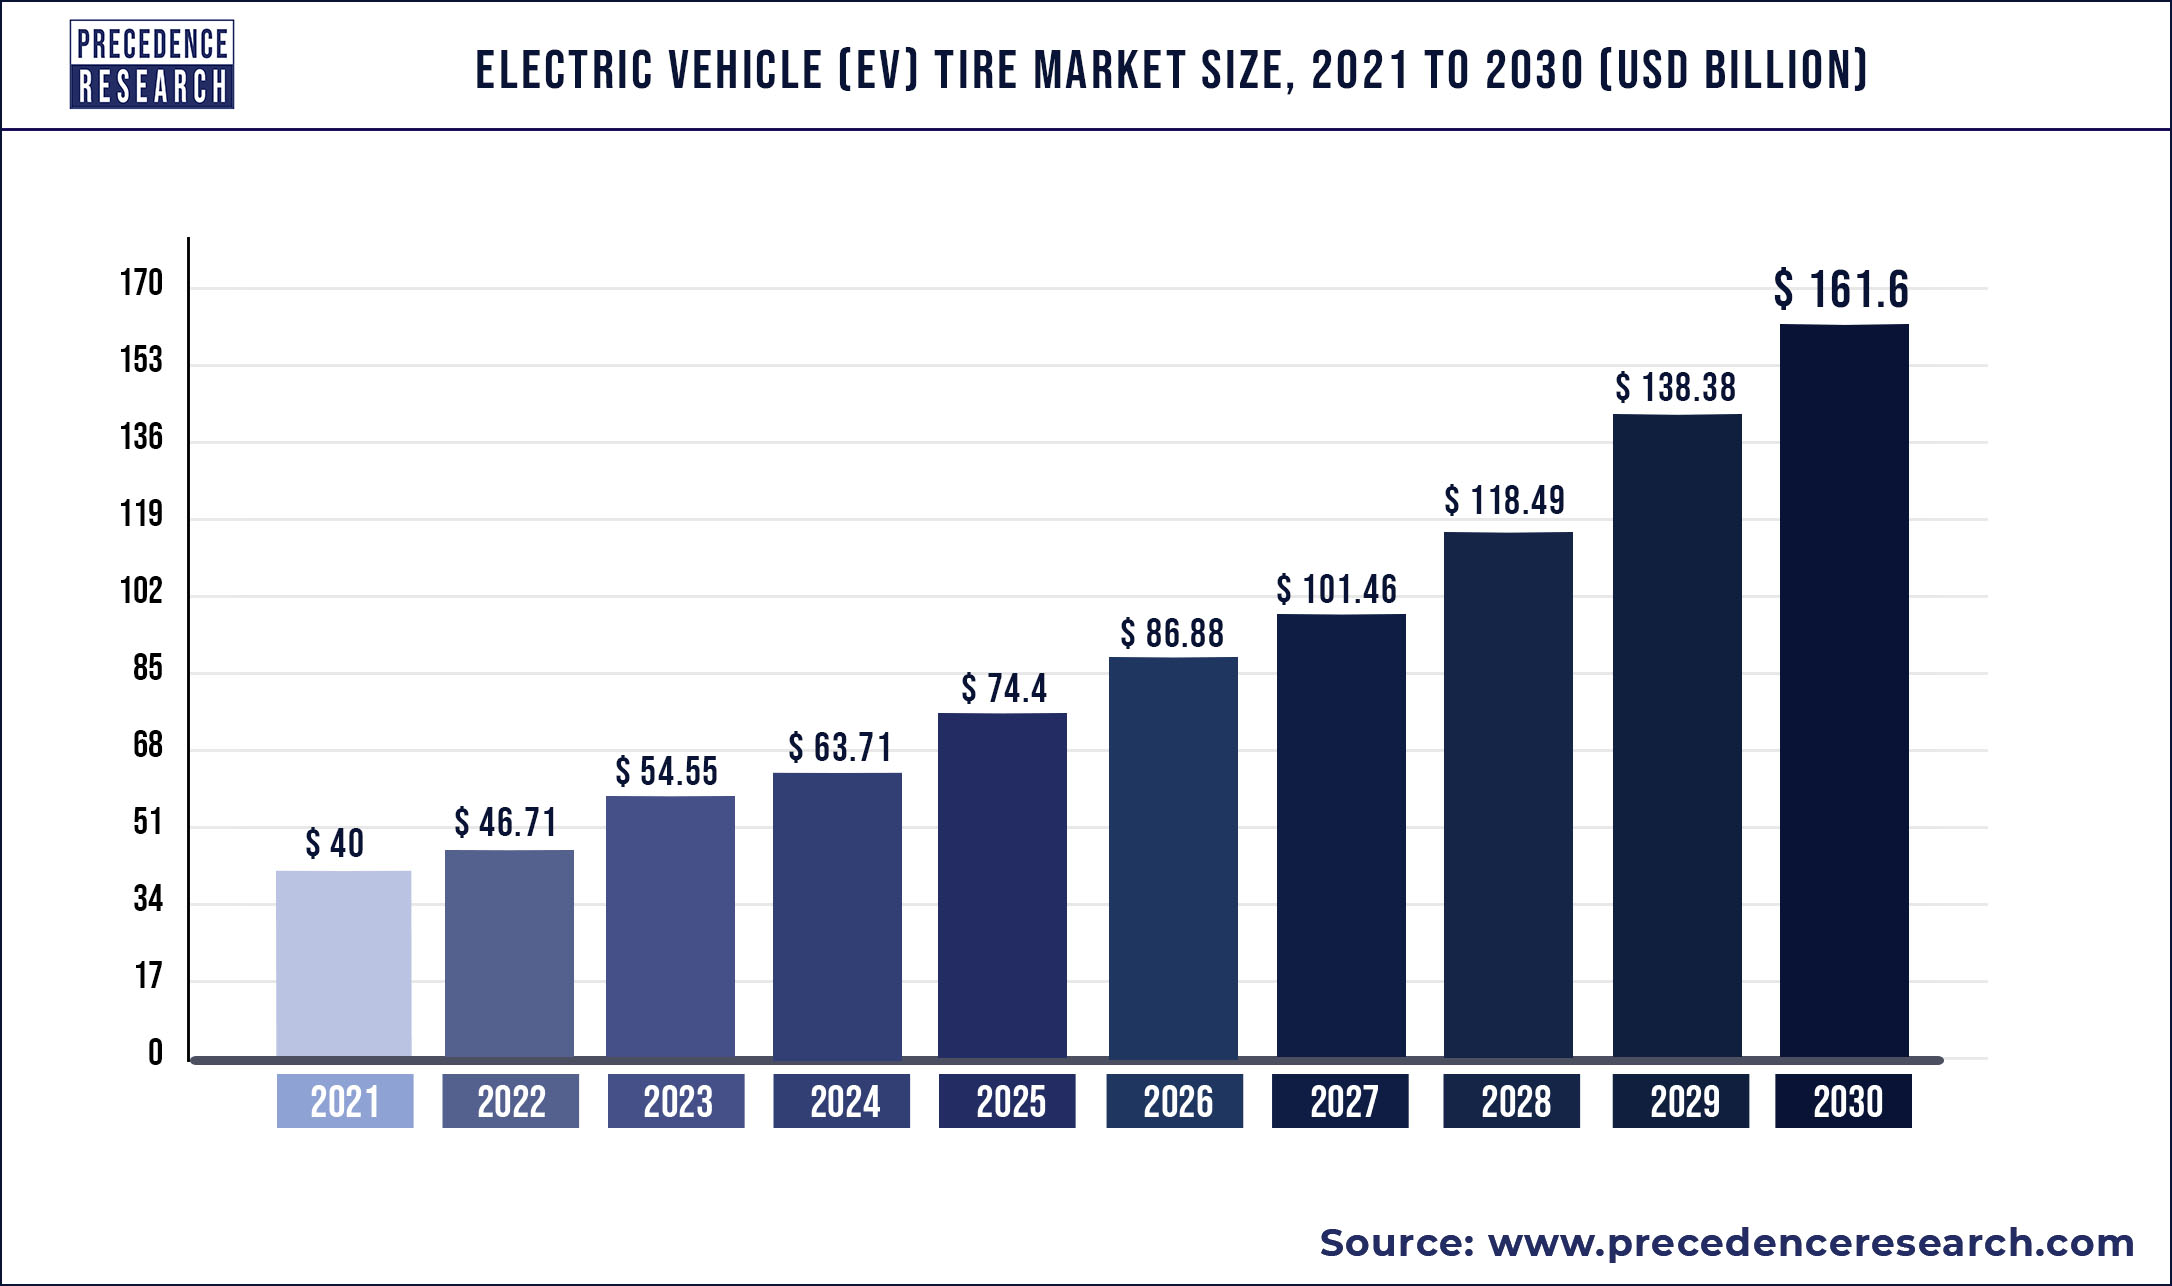 Electric Vehicle (EV) Tire Market Size to Exceed US$ 161.6 Billion by 2030 | Says Precedence Research